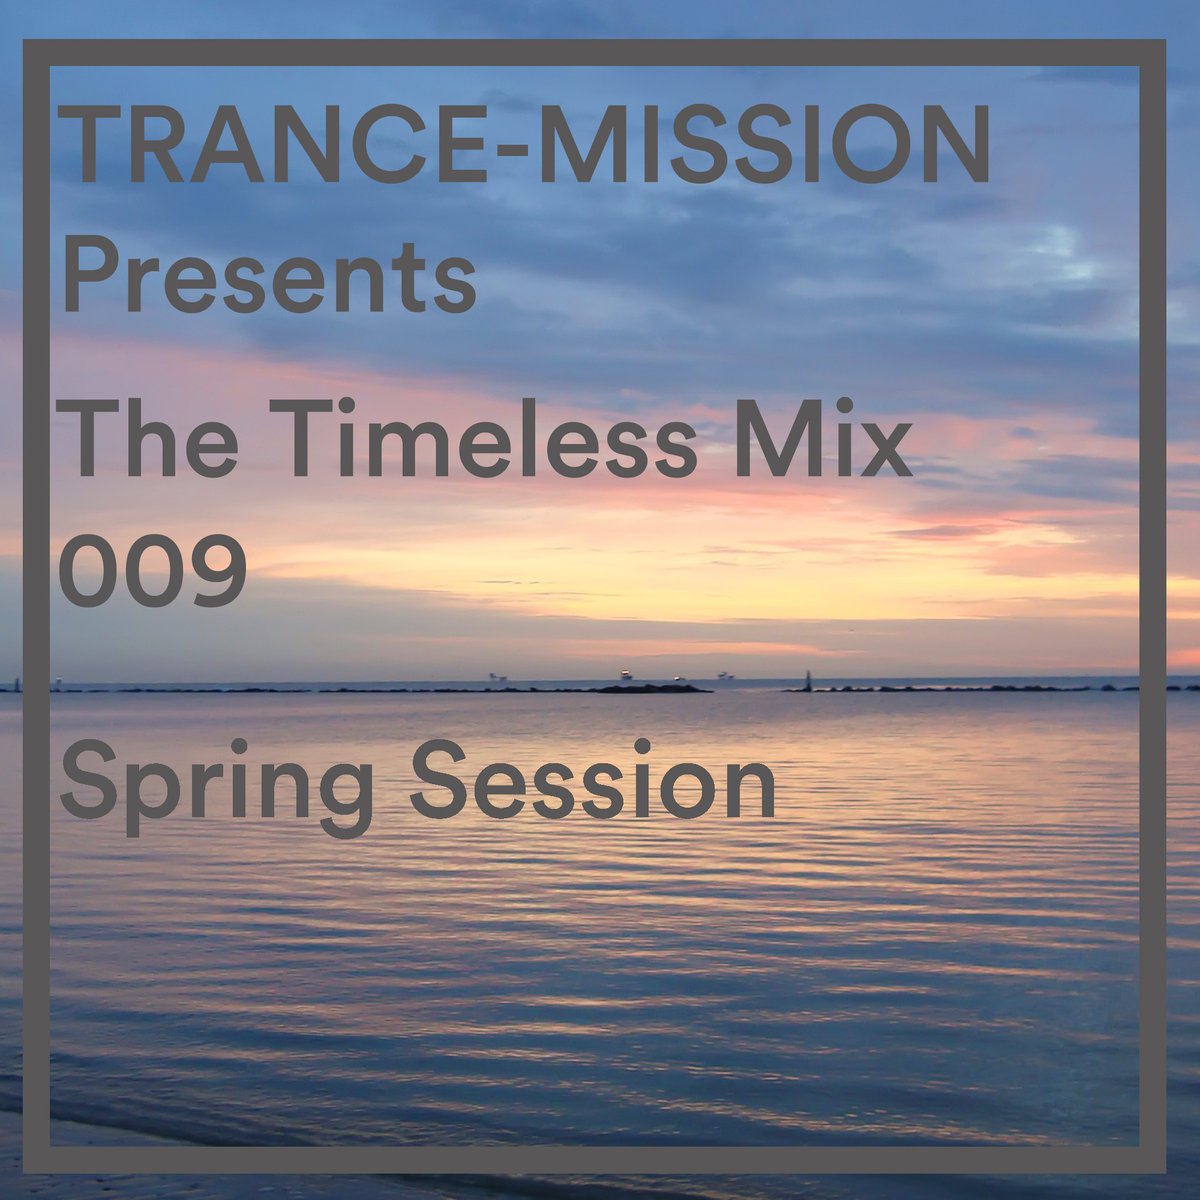 In a couple of minutes, will begin the chapter #009 of the #TimelessMix by #TRANCEMISSION on YouTube youtube.com/watch?v=XTBlA6… #Trance #TranceFamily #TranceFamilyMexico #TranceFamilyMx @TranceFamilyBOS @TranceFamilyCom @trance_es @PlayTranceRadio